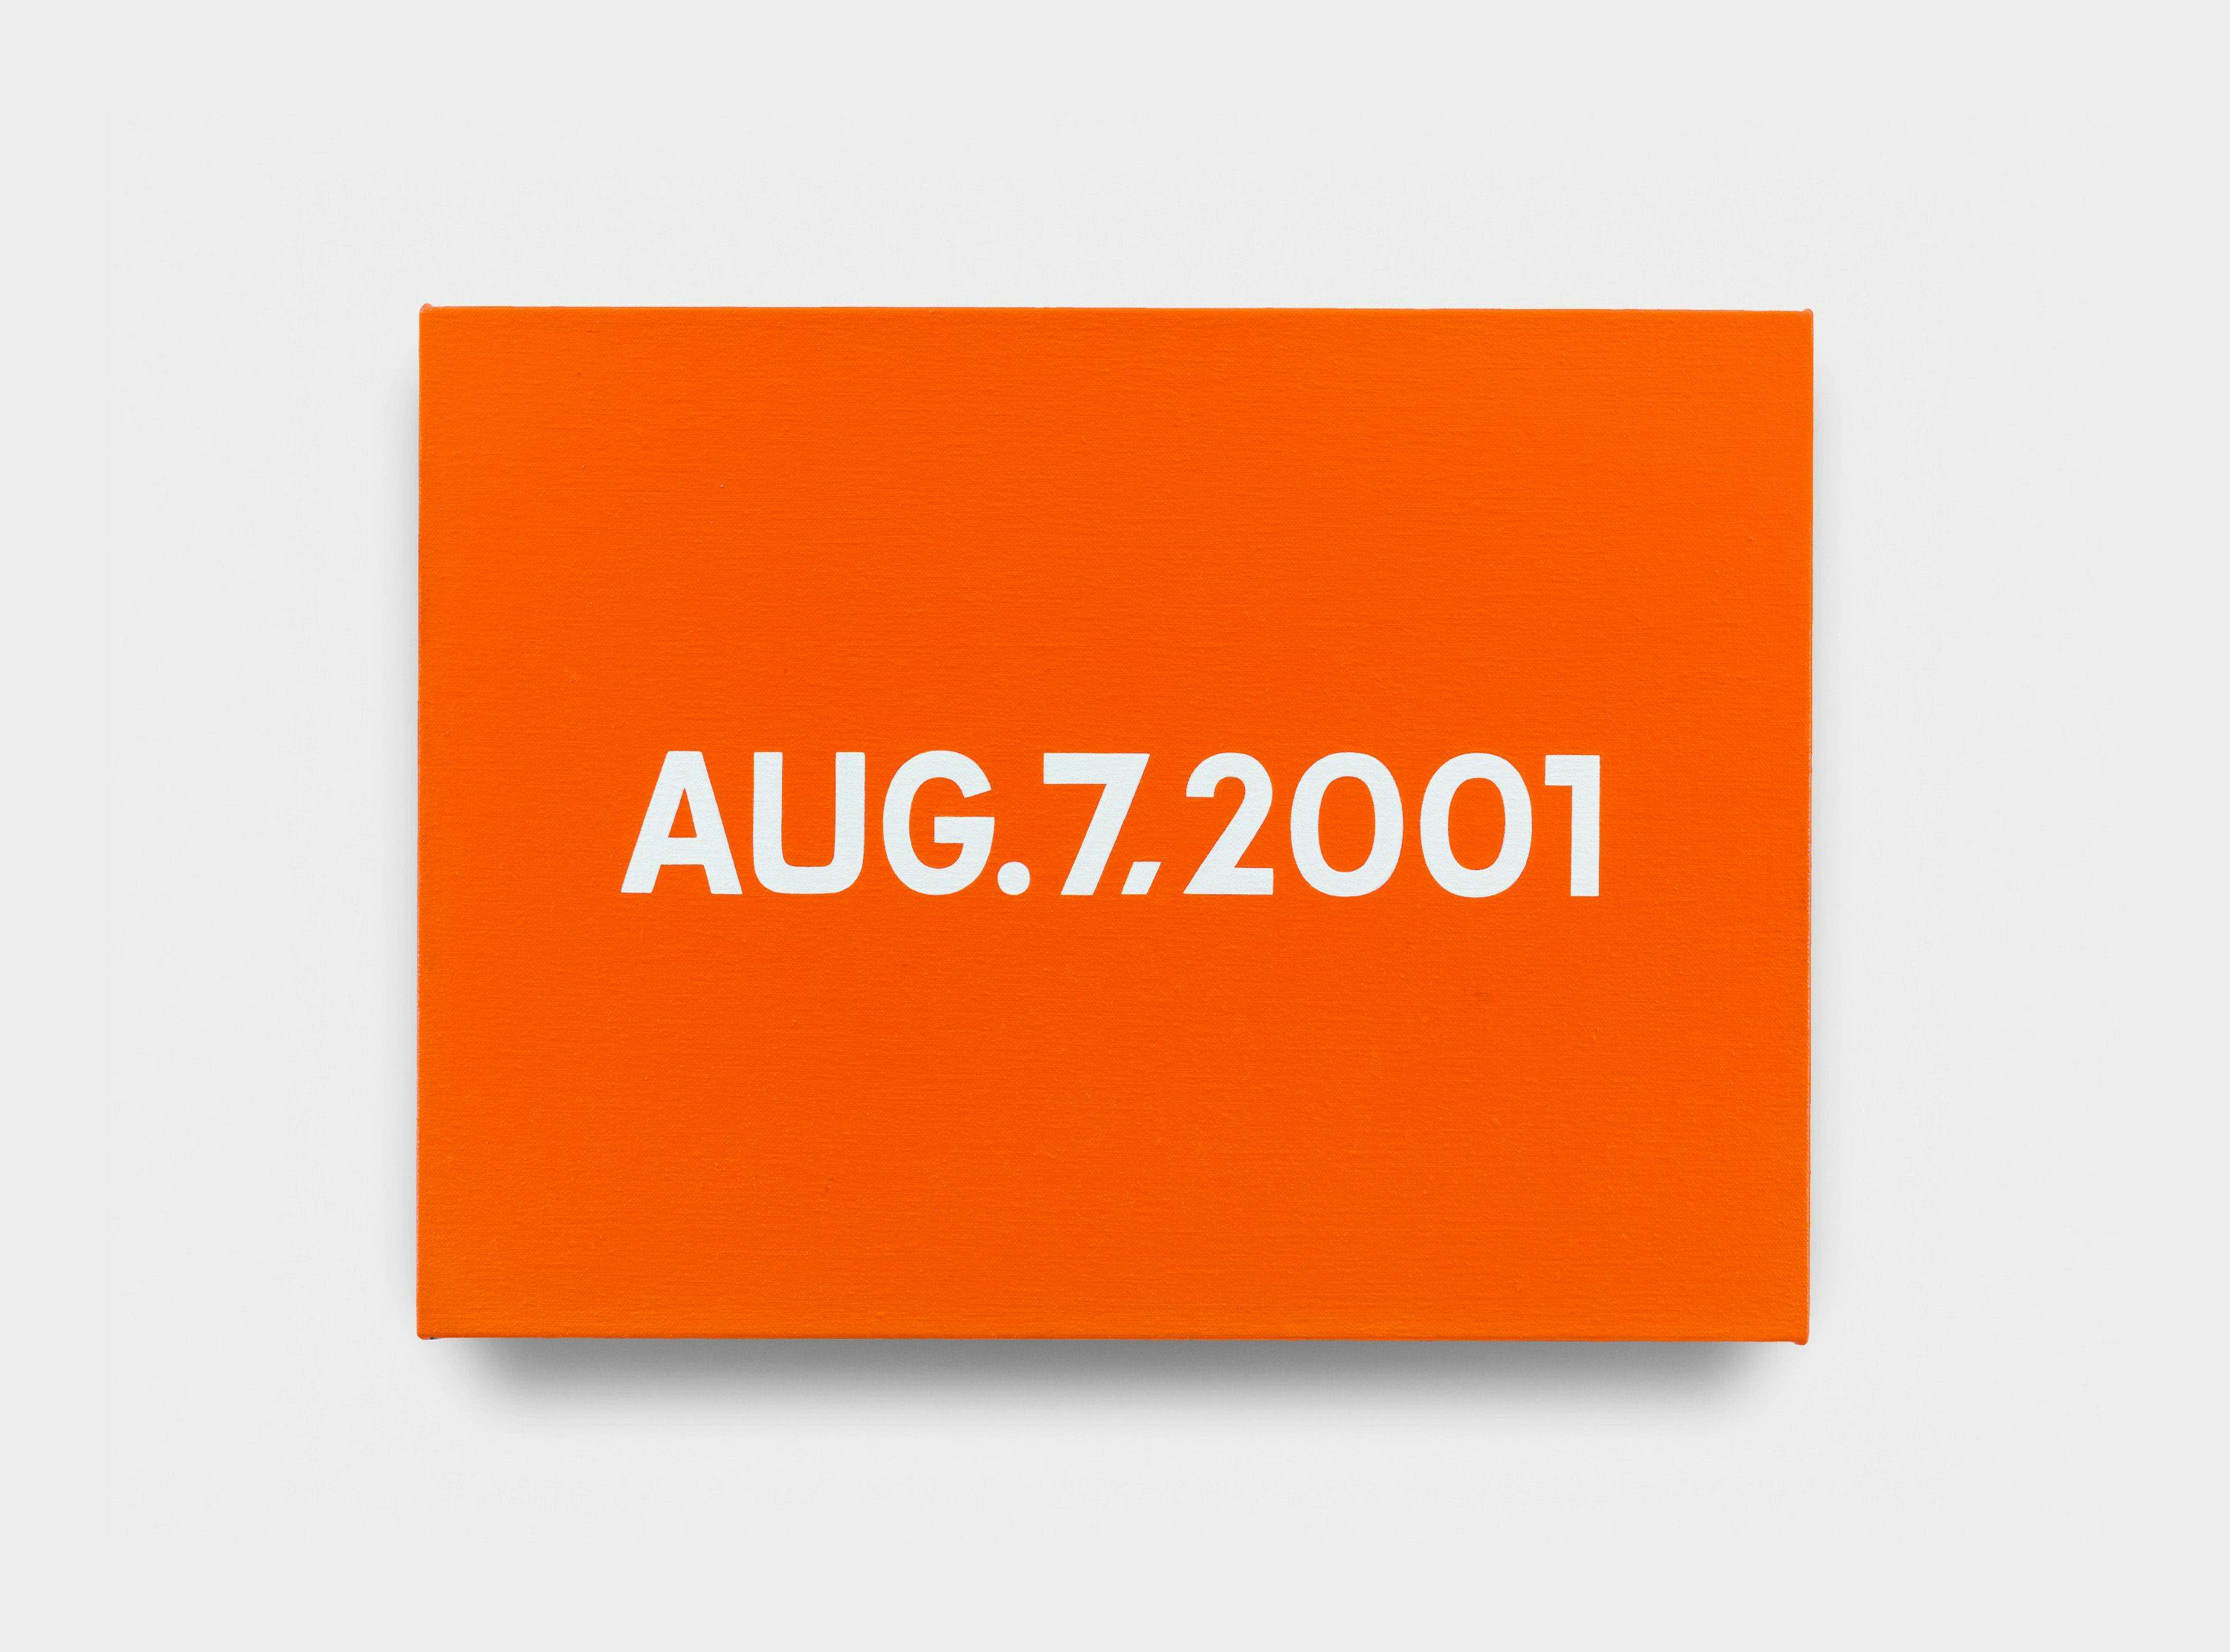 A painting by On Kawara, titled AUG. 7, 2001, 2001 from "Today" series, 1966 to 2013.